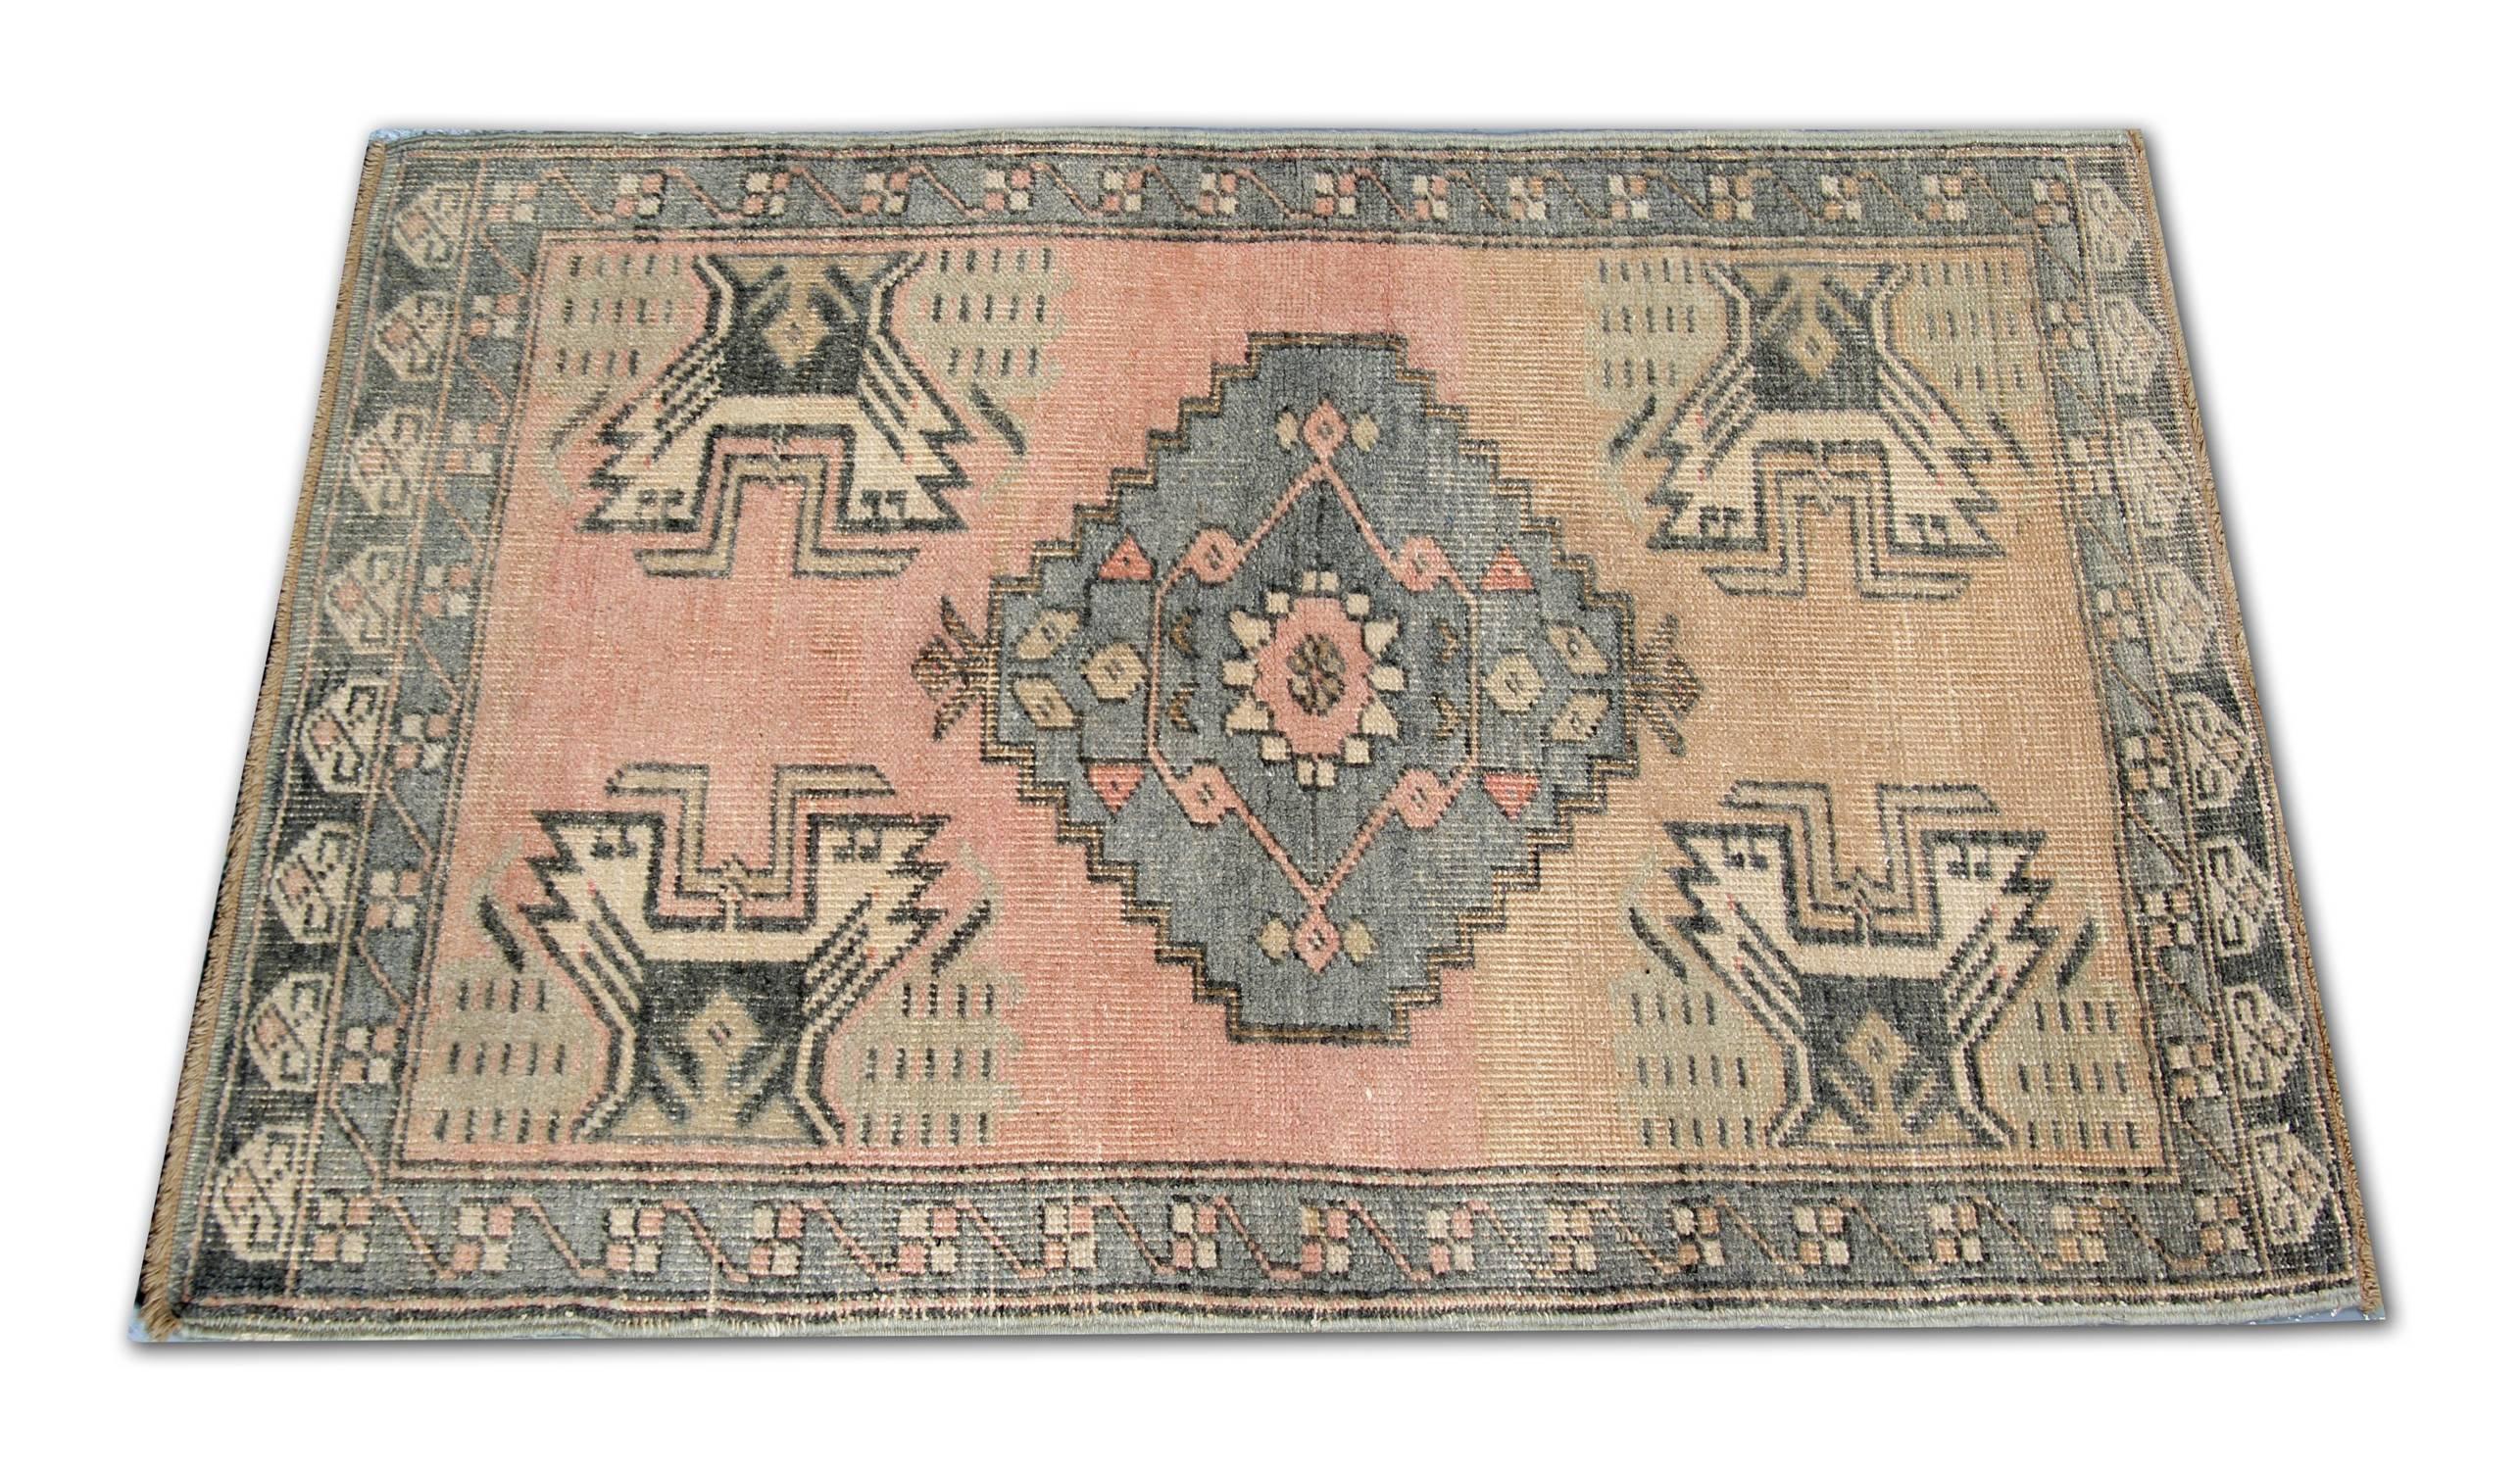 Vintage Anatolian rug, circa 1950s in an excellent condition with geometrical design and palette of nice light colors.